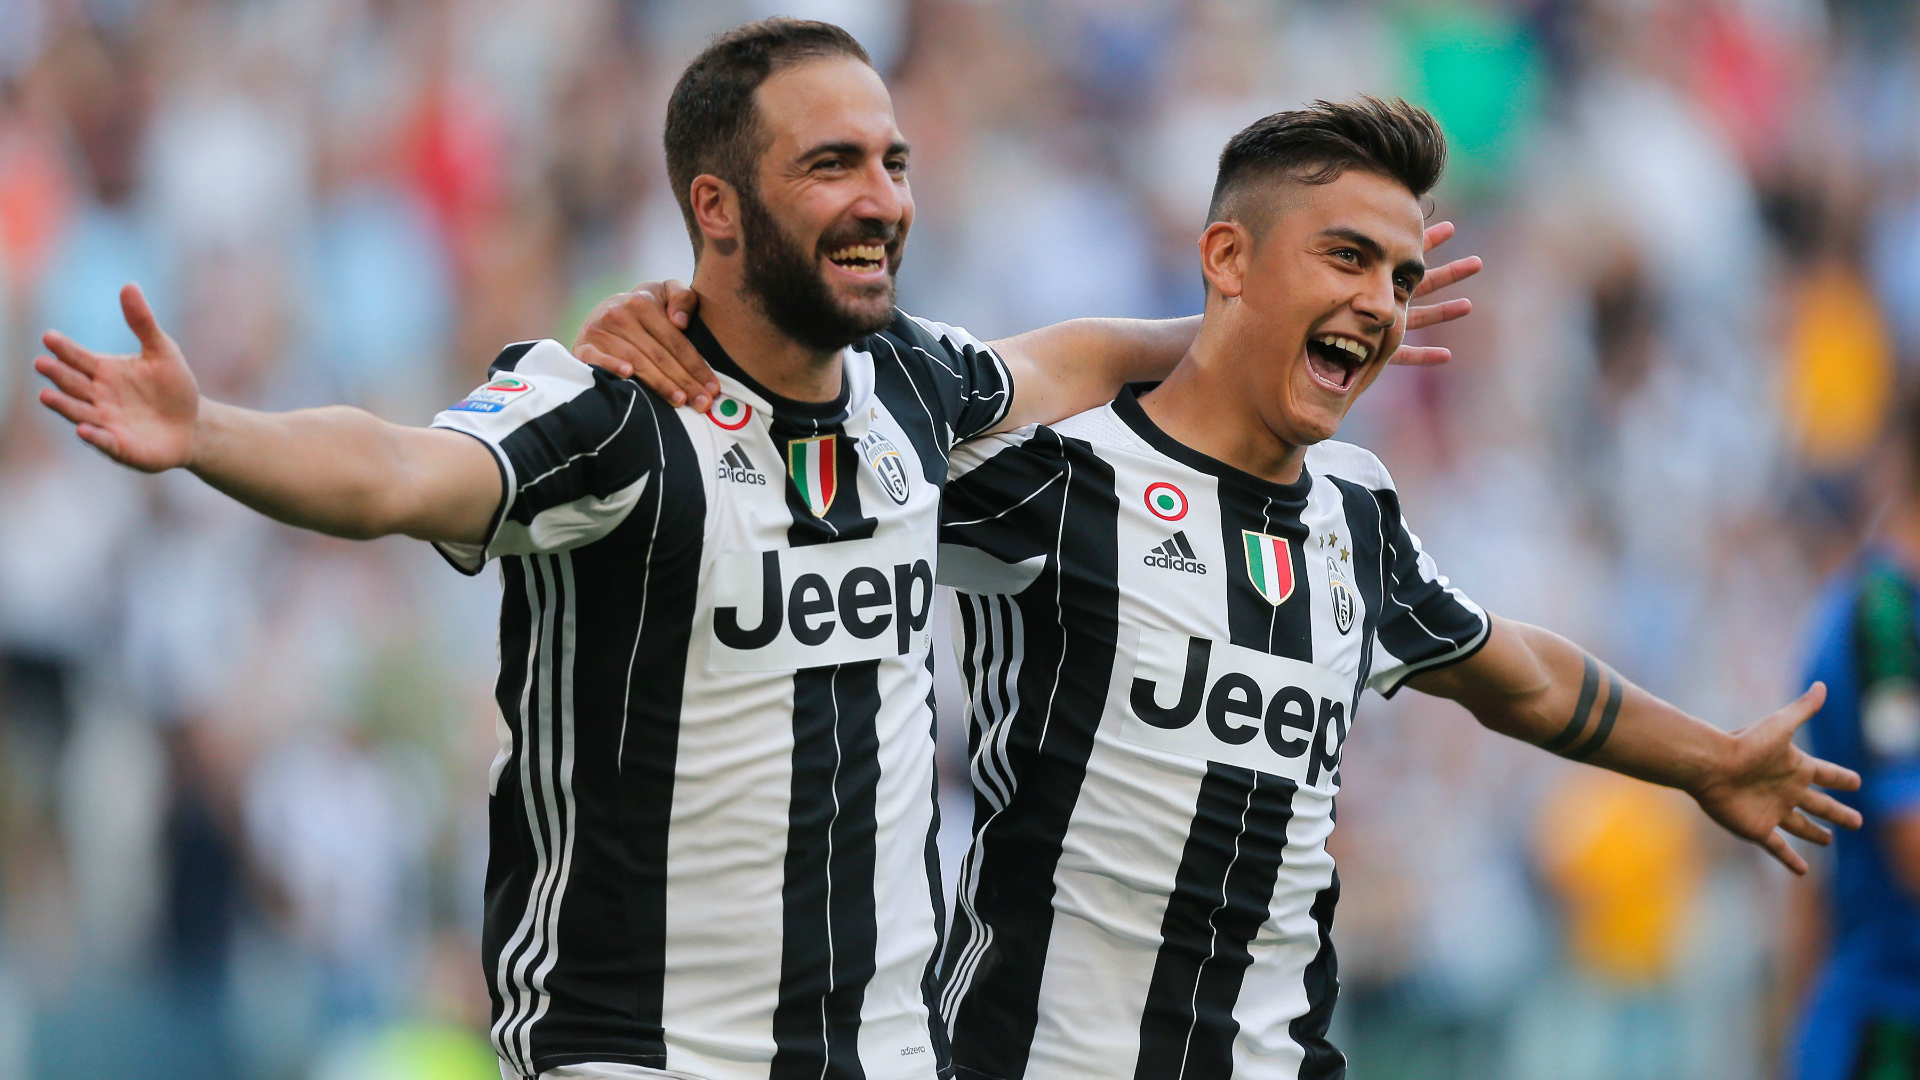 World Cup 2018 Qualifiers Discussion - Page 15 Higuain-dybala-juventus-sassuolo-serie-a_12xjn5bc88hes1e5o8b37l5t3r